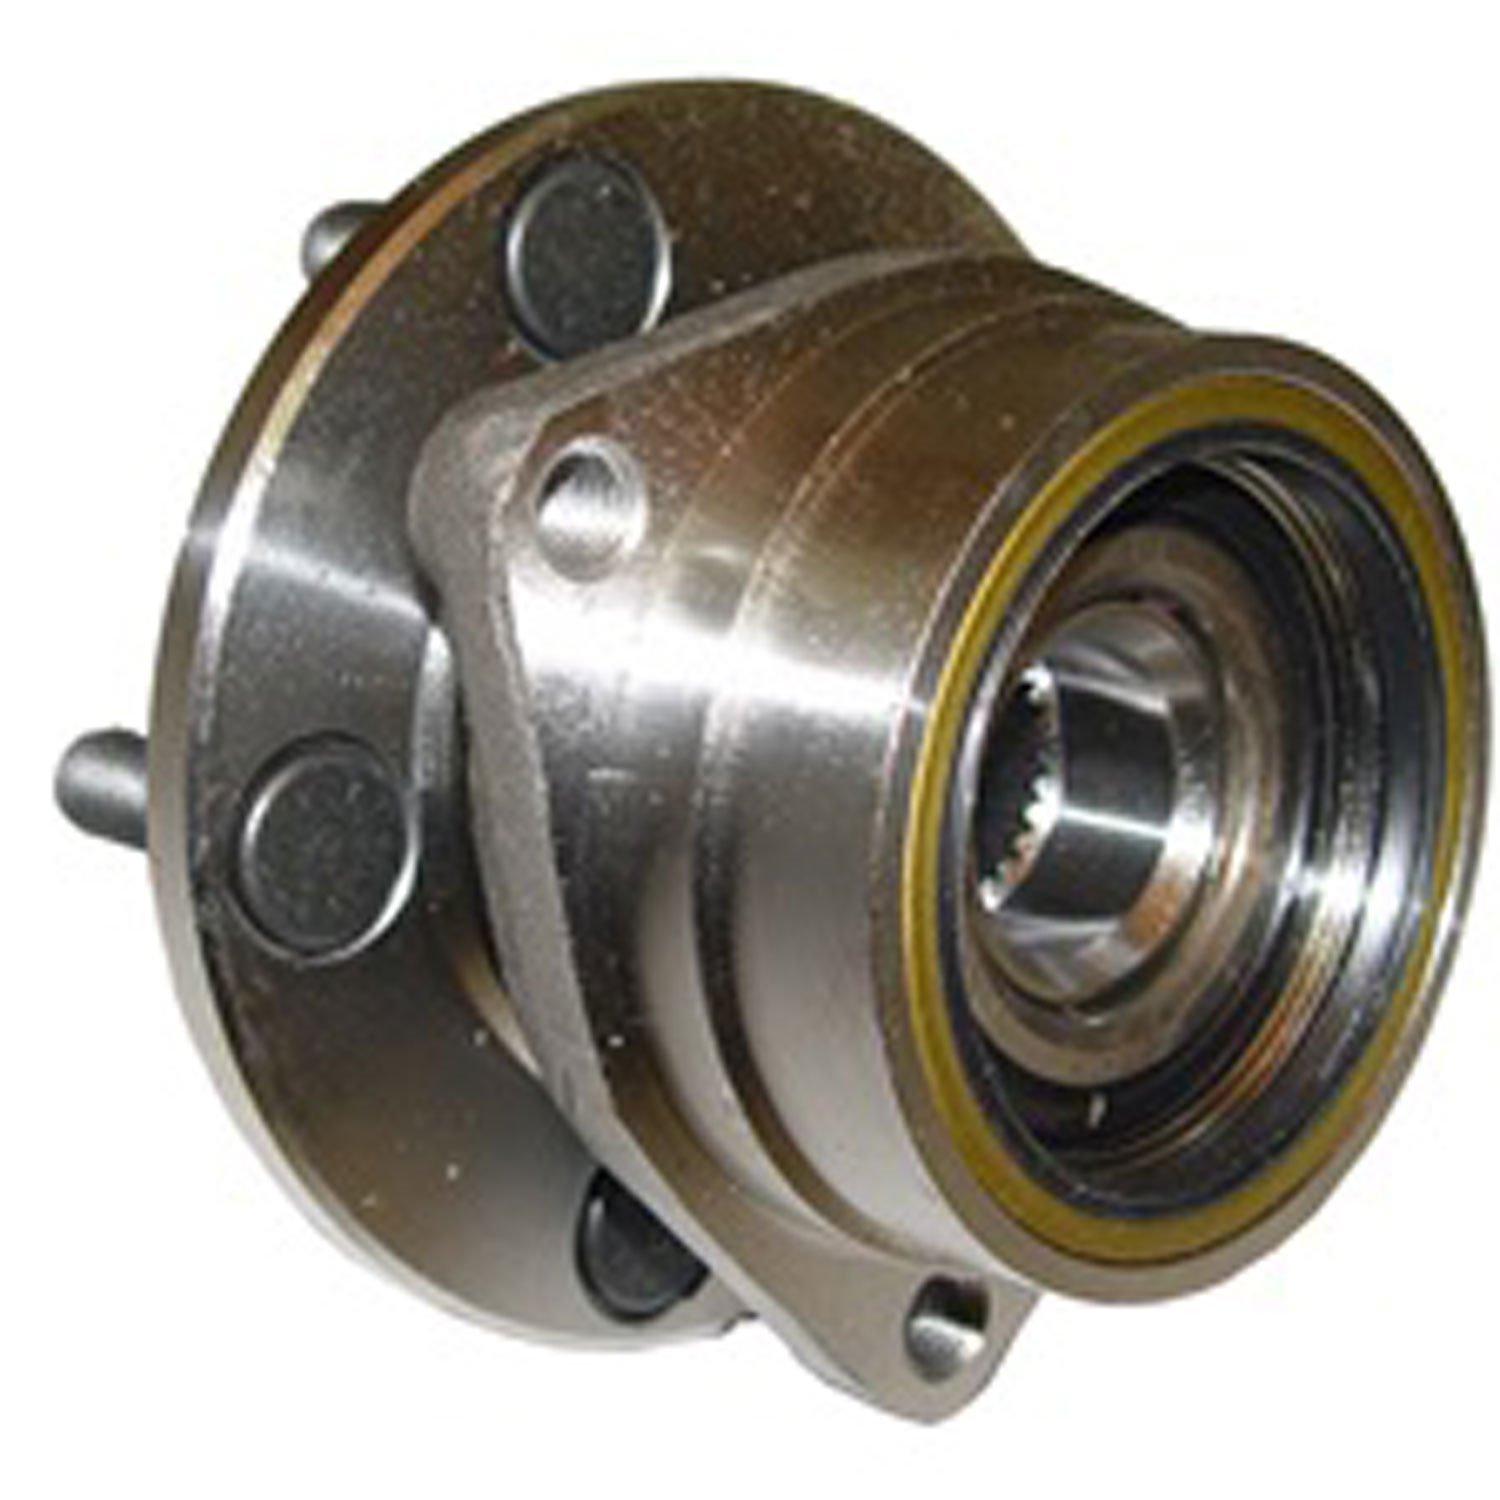 This front axle hub assembly from Omix-ADA fits